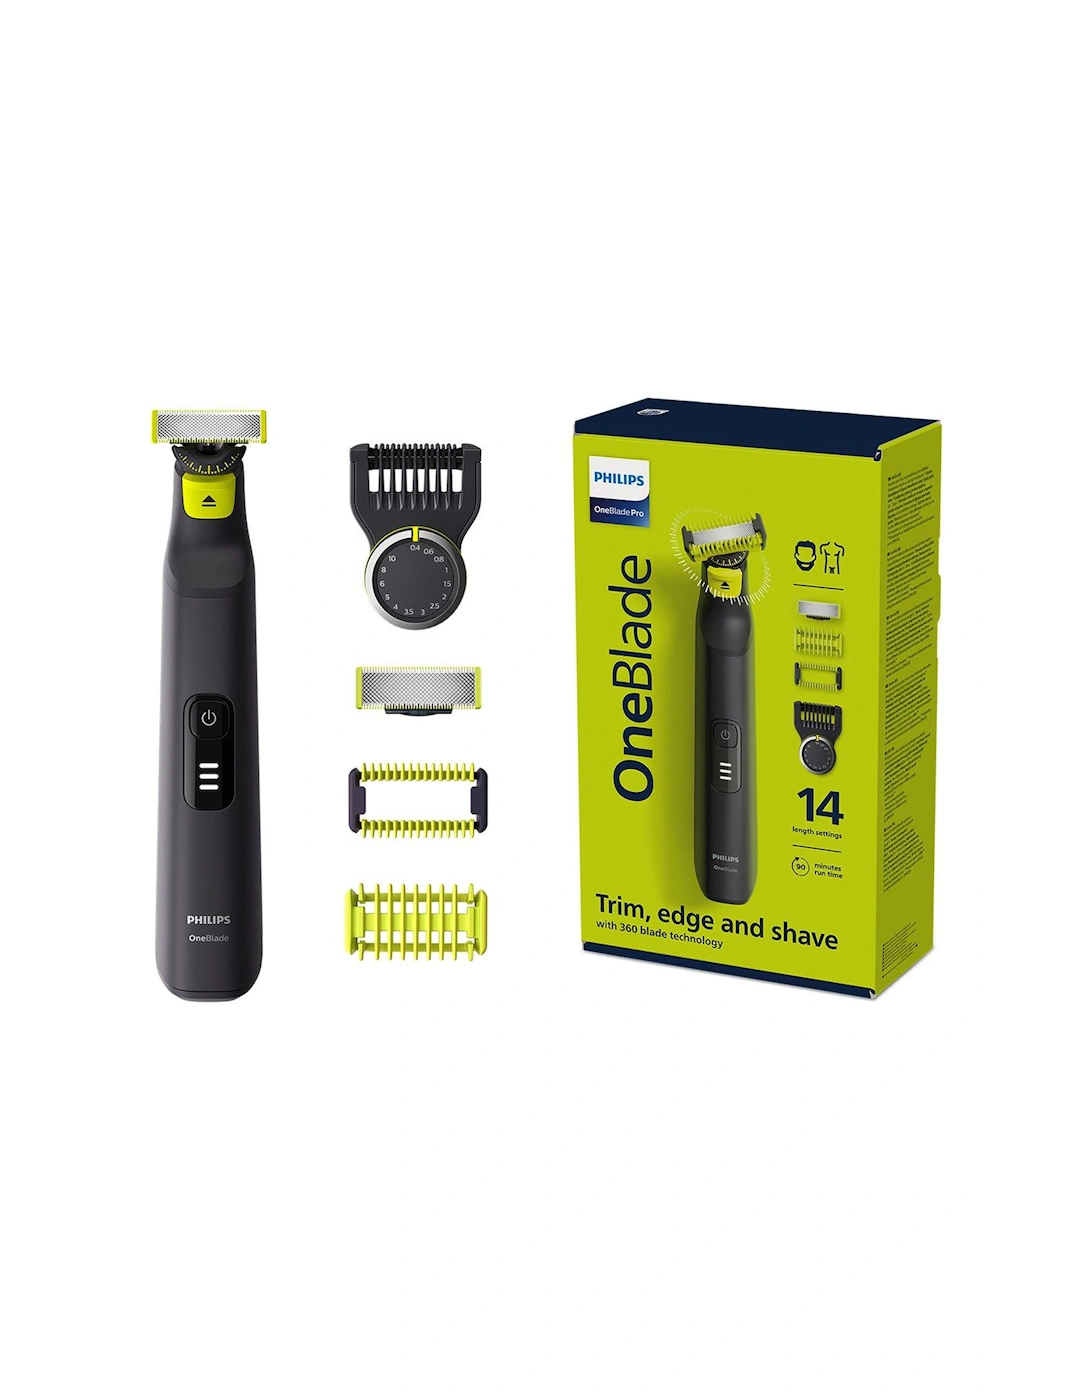 OneBlade Pro 360 for Face & Body with 14-in-1 Adjustable Comb - Trim, Edge, Shave, QP6541/15, 3 of 2